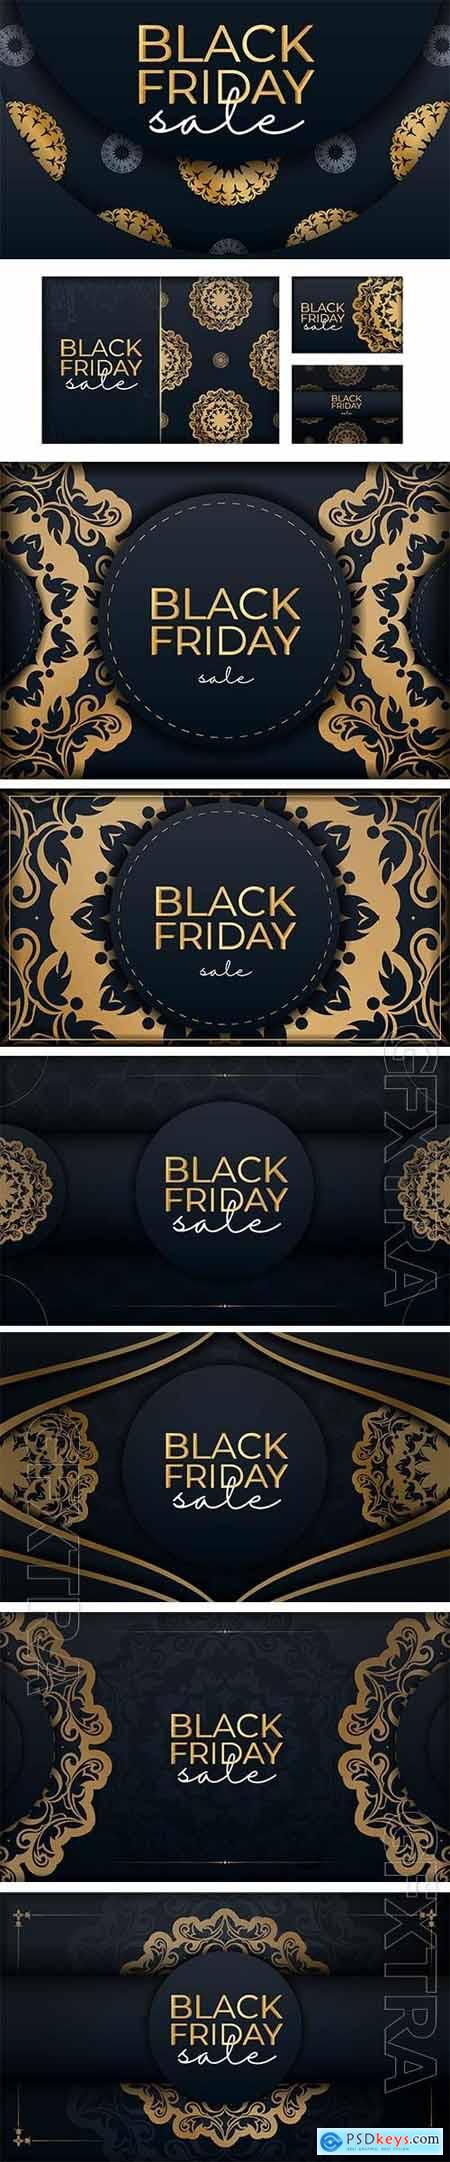 Black friday sale poster with vintage gold pattern premium vector